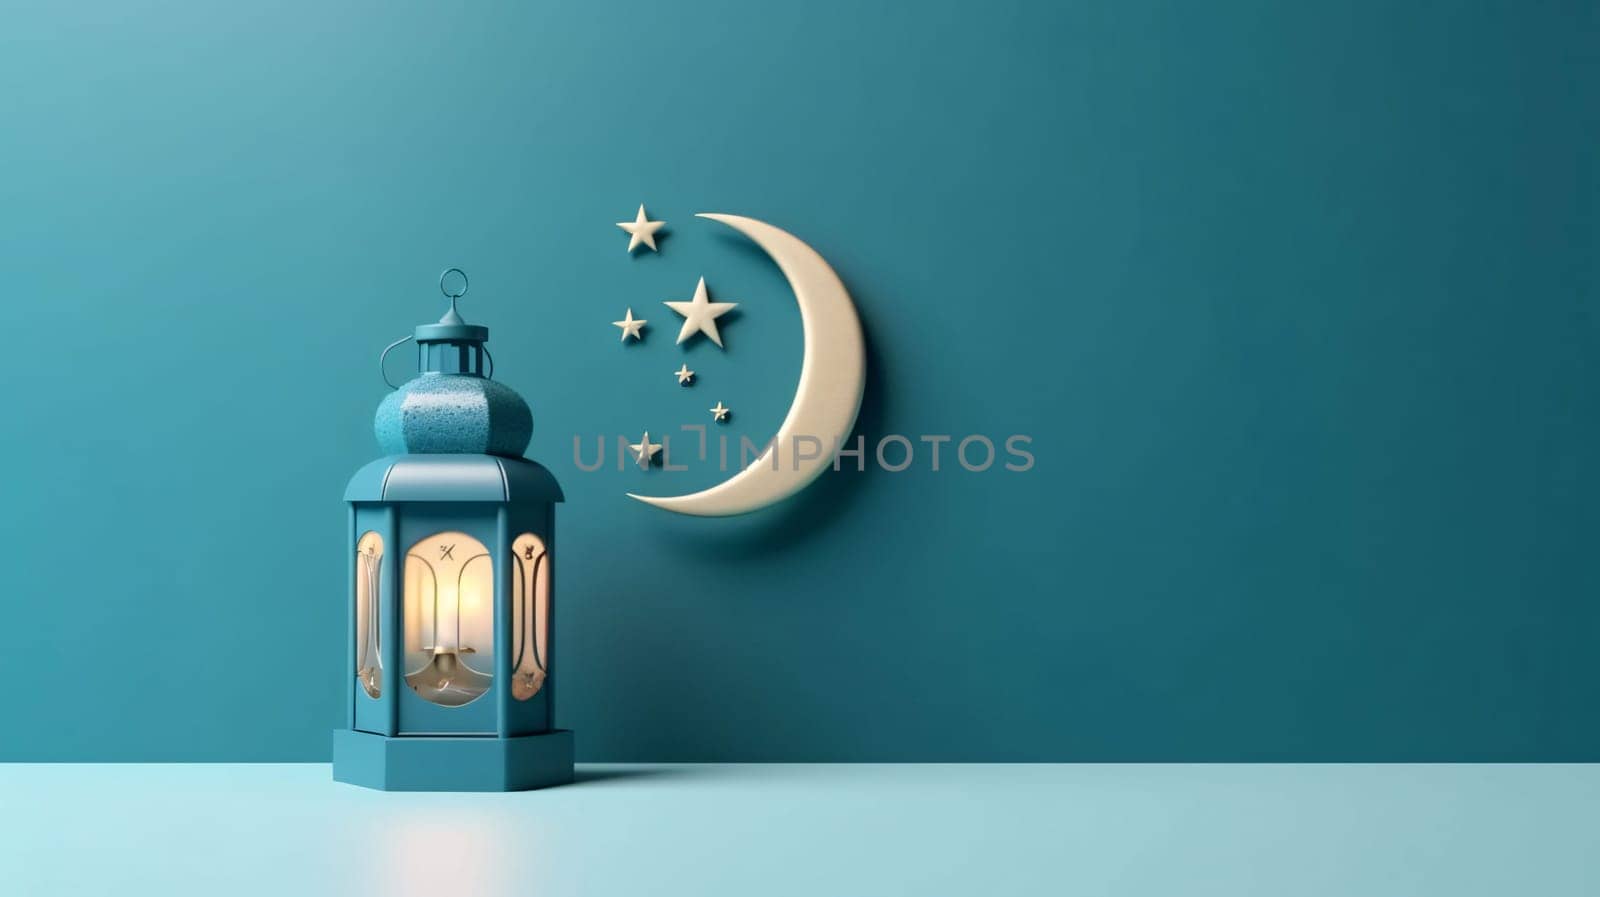 Banner: Ramadan Kareem lantern with crescent moon and stars on blue wall background